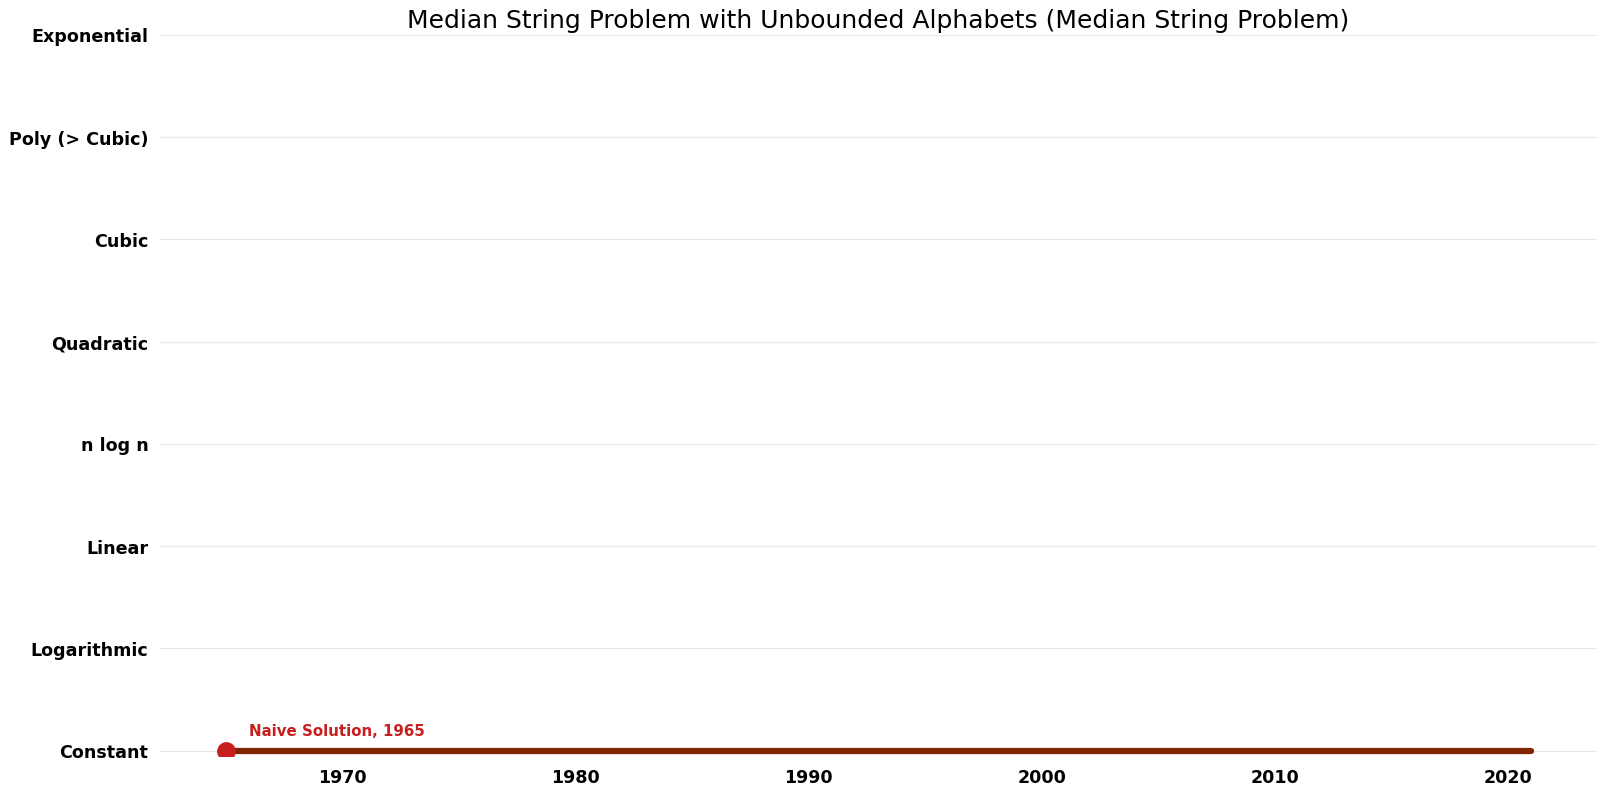 Median String Problem - Median String Problem with Unbounded Alphabets - Space.png